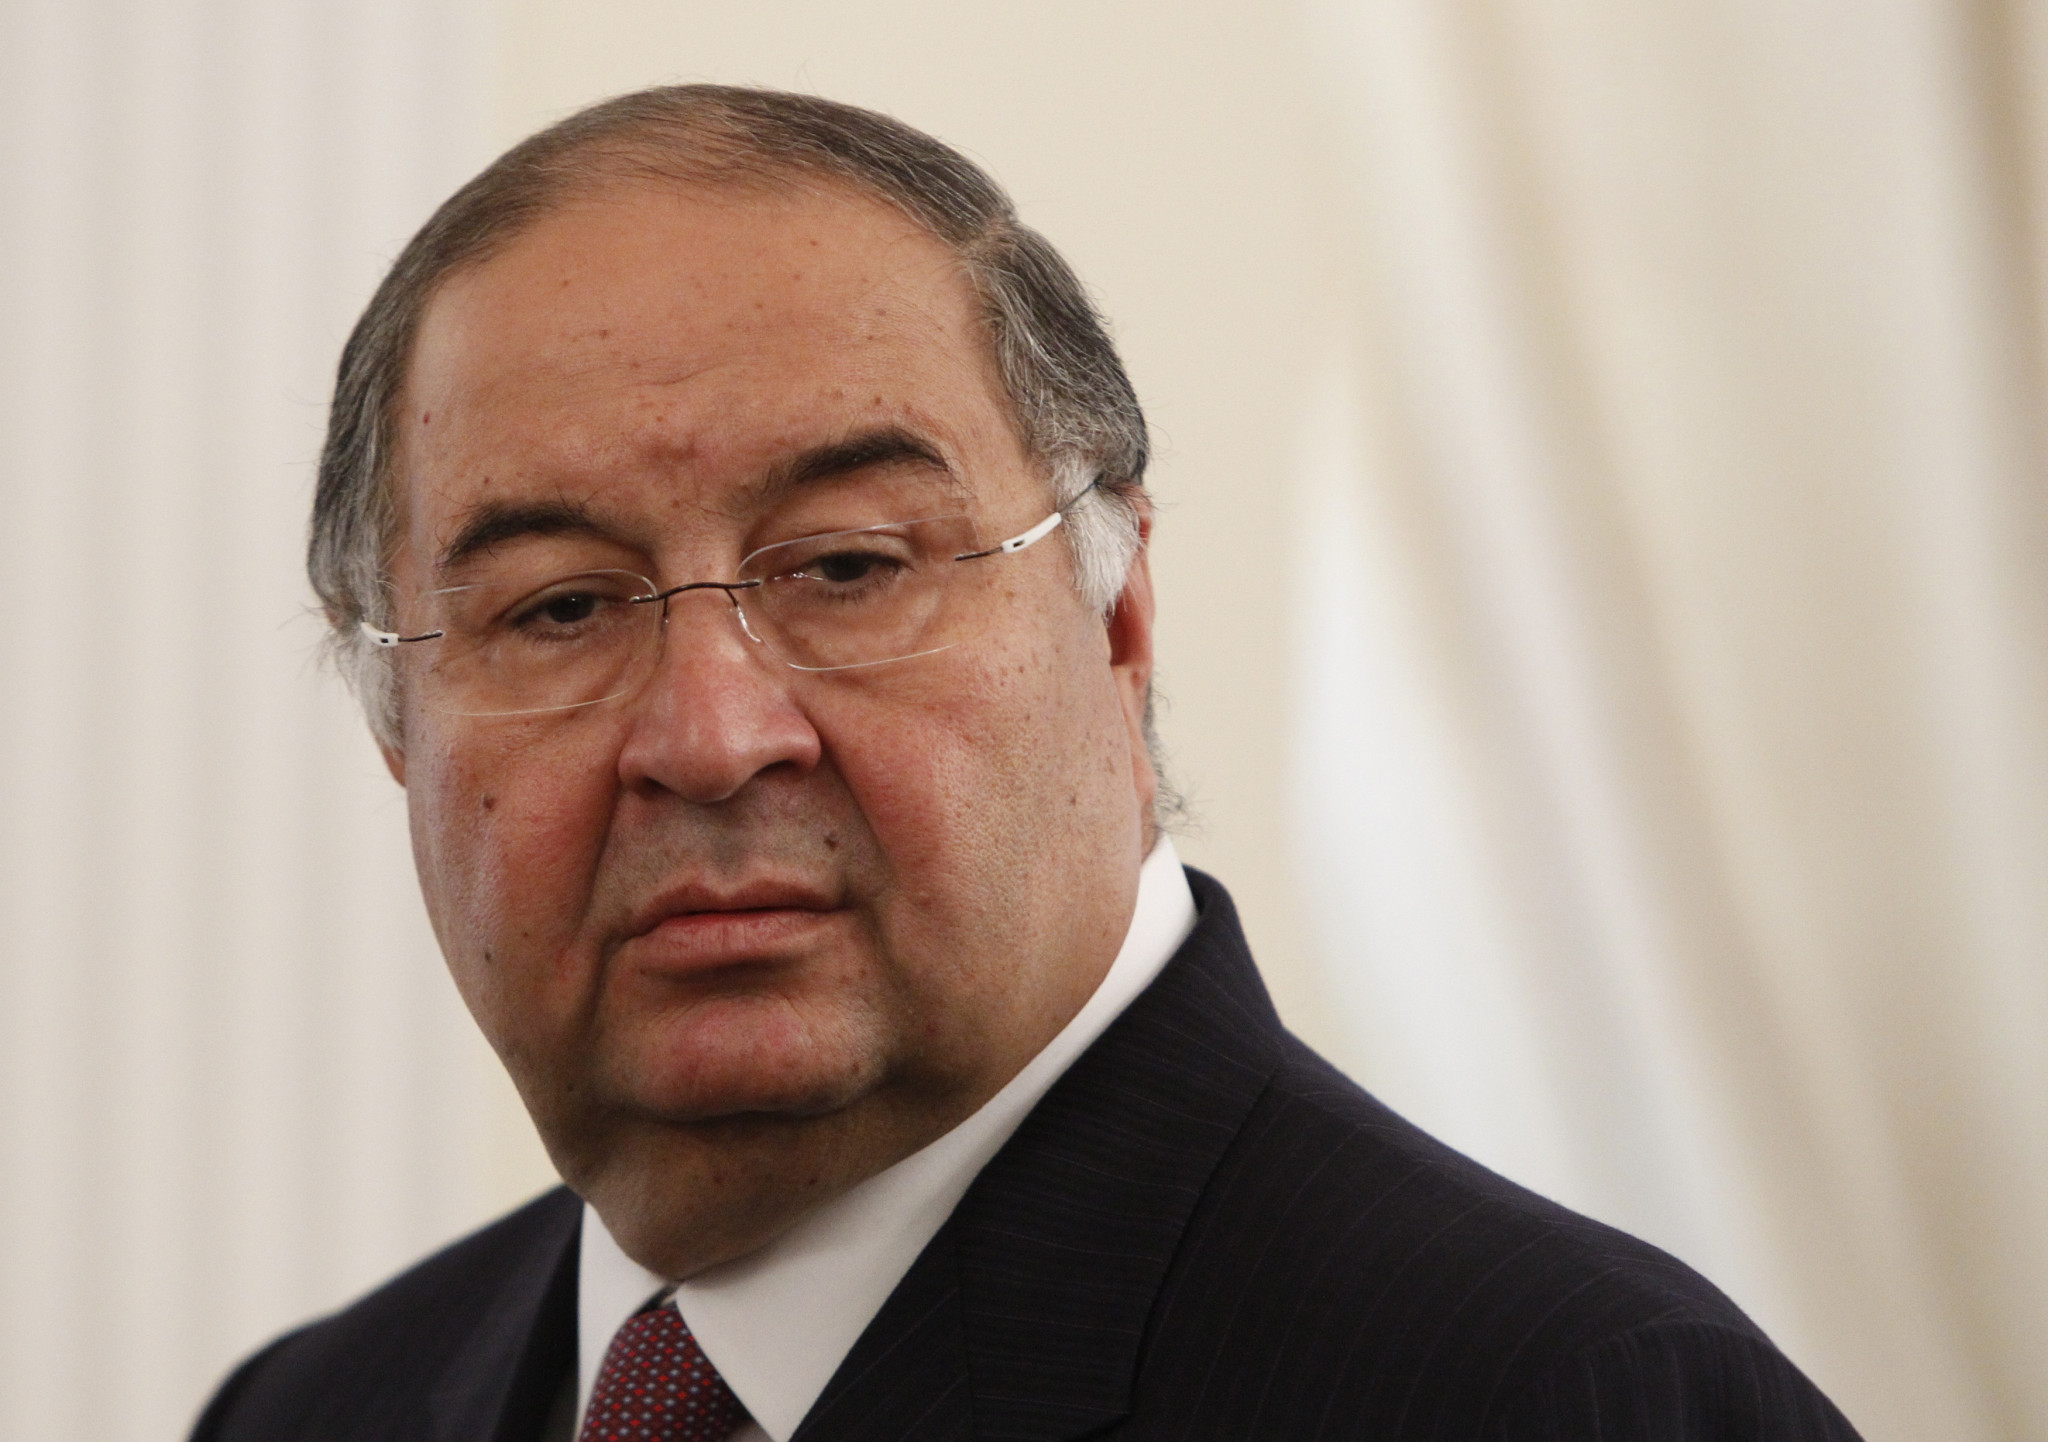 Alisher Usmanov has questioned the "validity and quality" of the investigation into him ©Getty Images